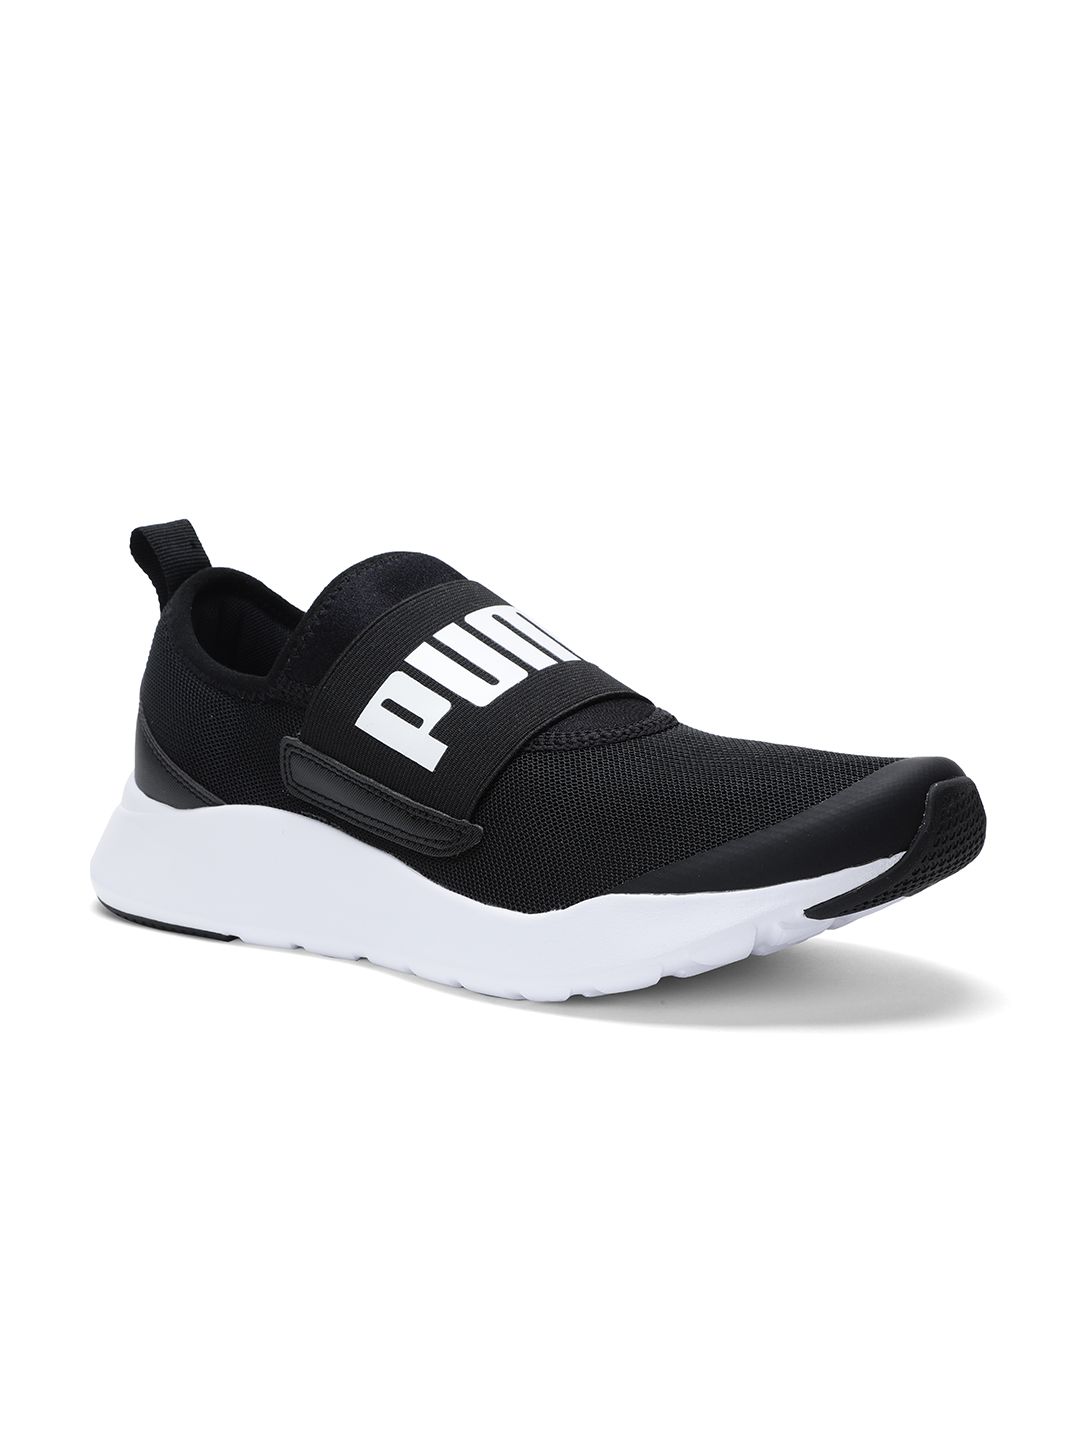 Puma Unisex Black Wired Slip-On Sneakers Price in India